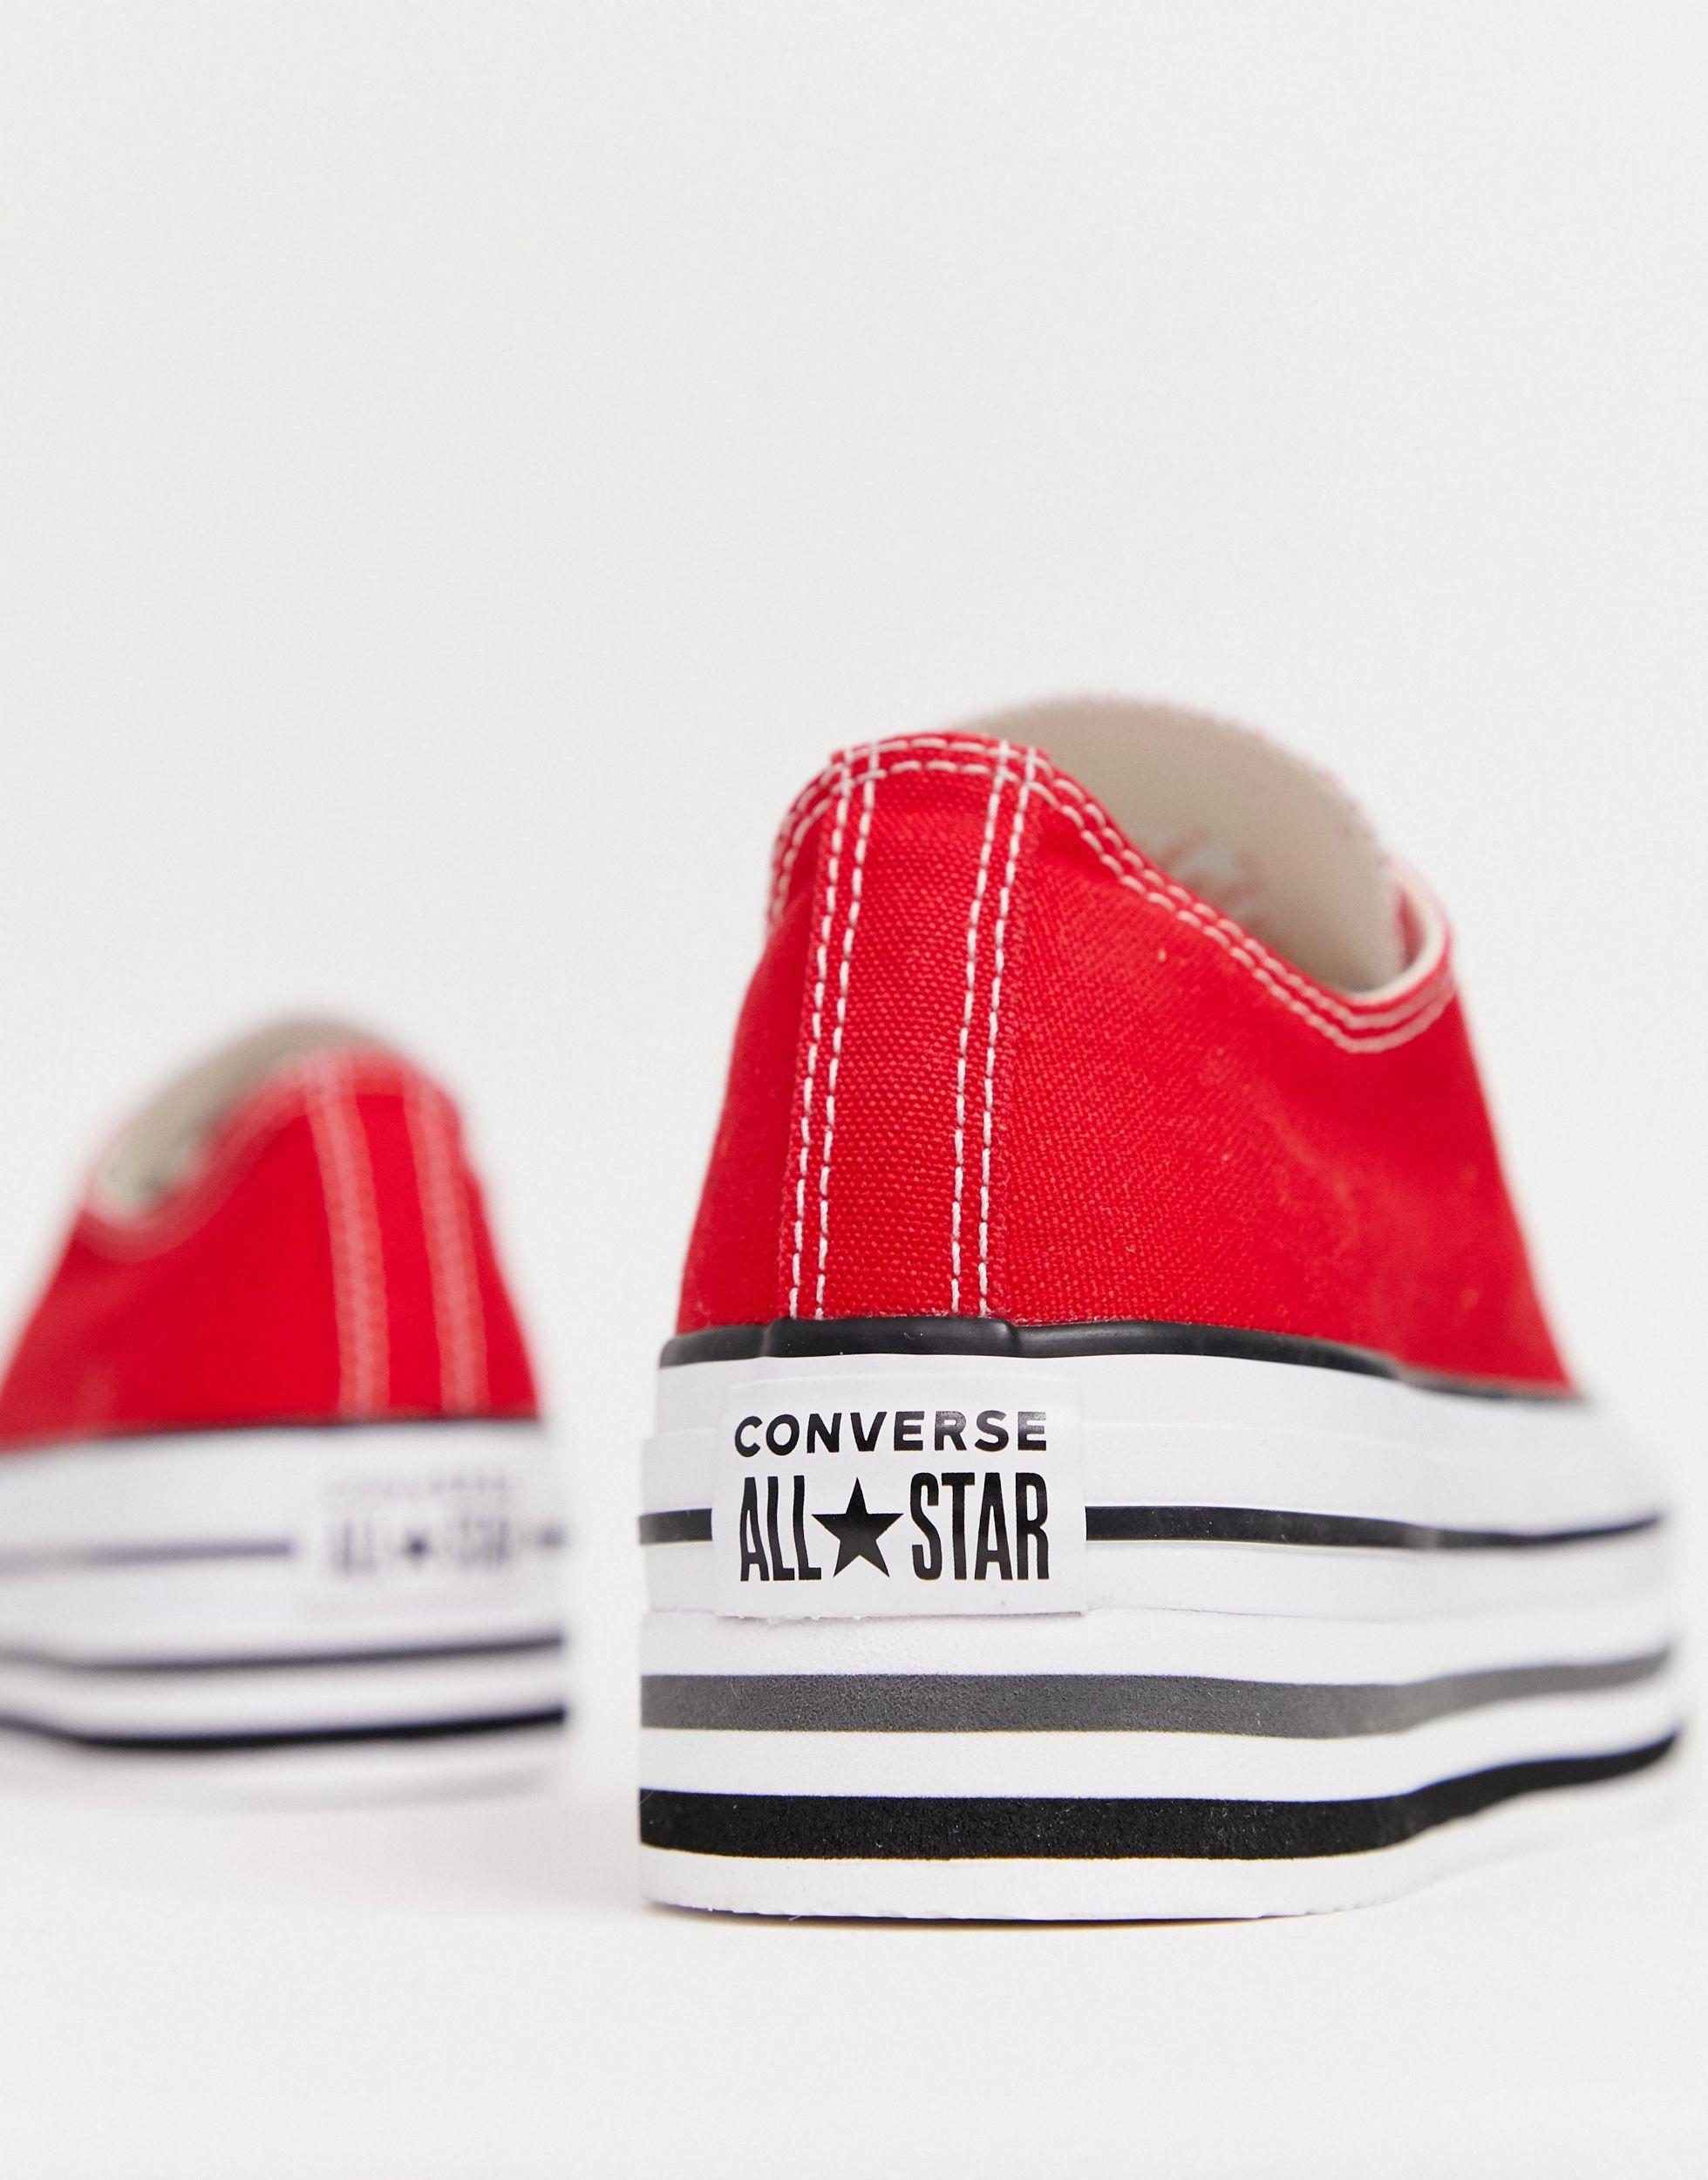 All Star Red Converse | lupon.gov.ph